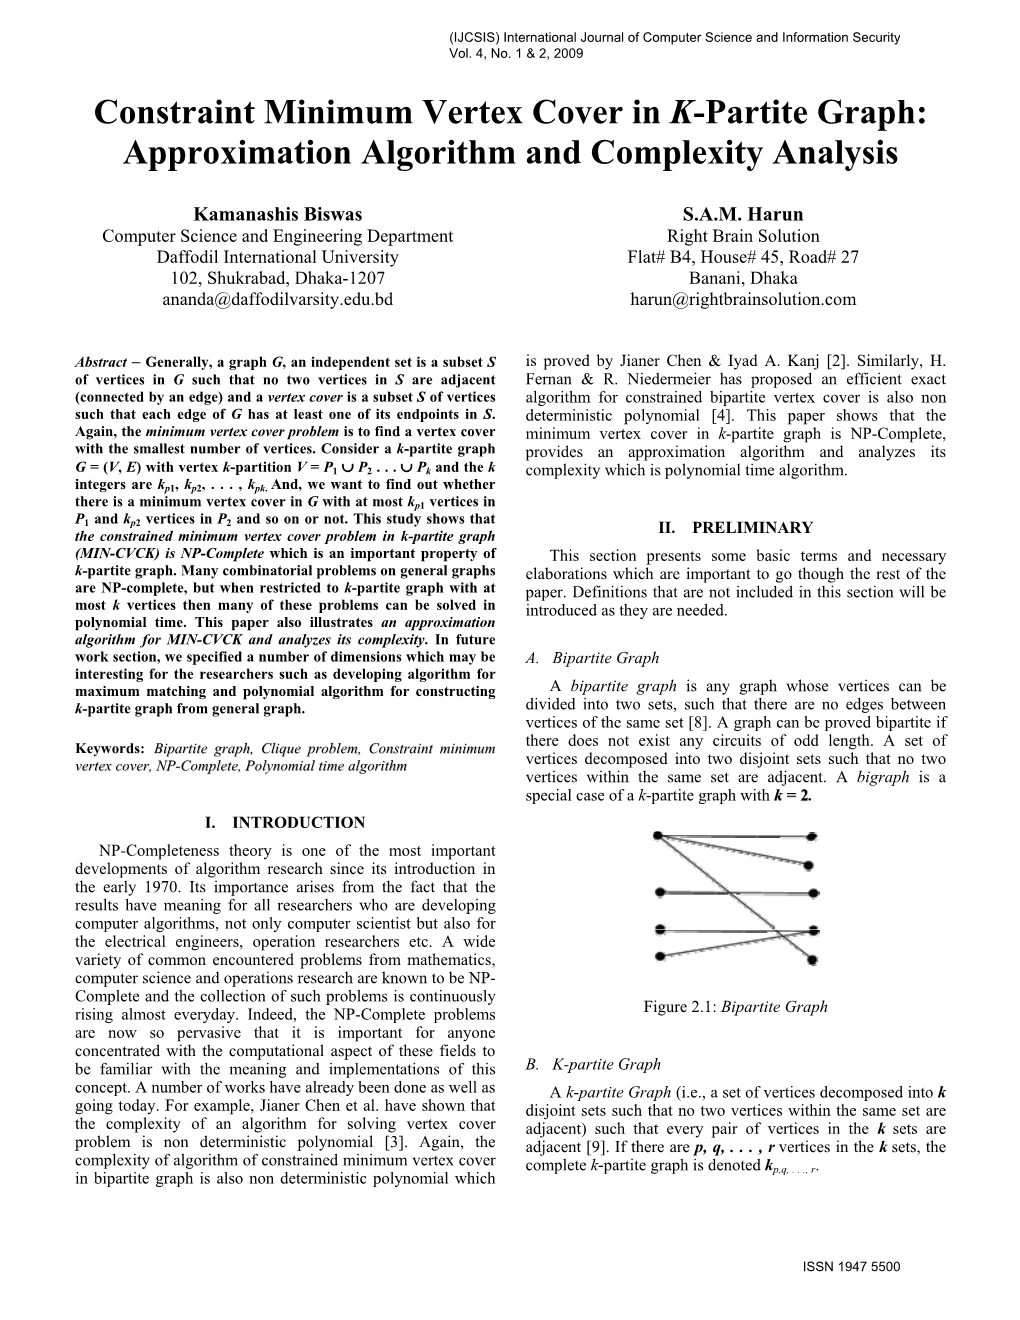 Constraint Minimum Vertex Cover in K-Partite Graph: Approximation Algorithm and Complexity Analysis